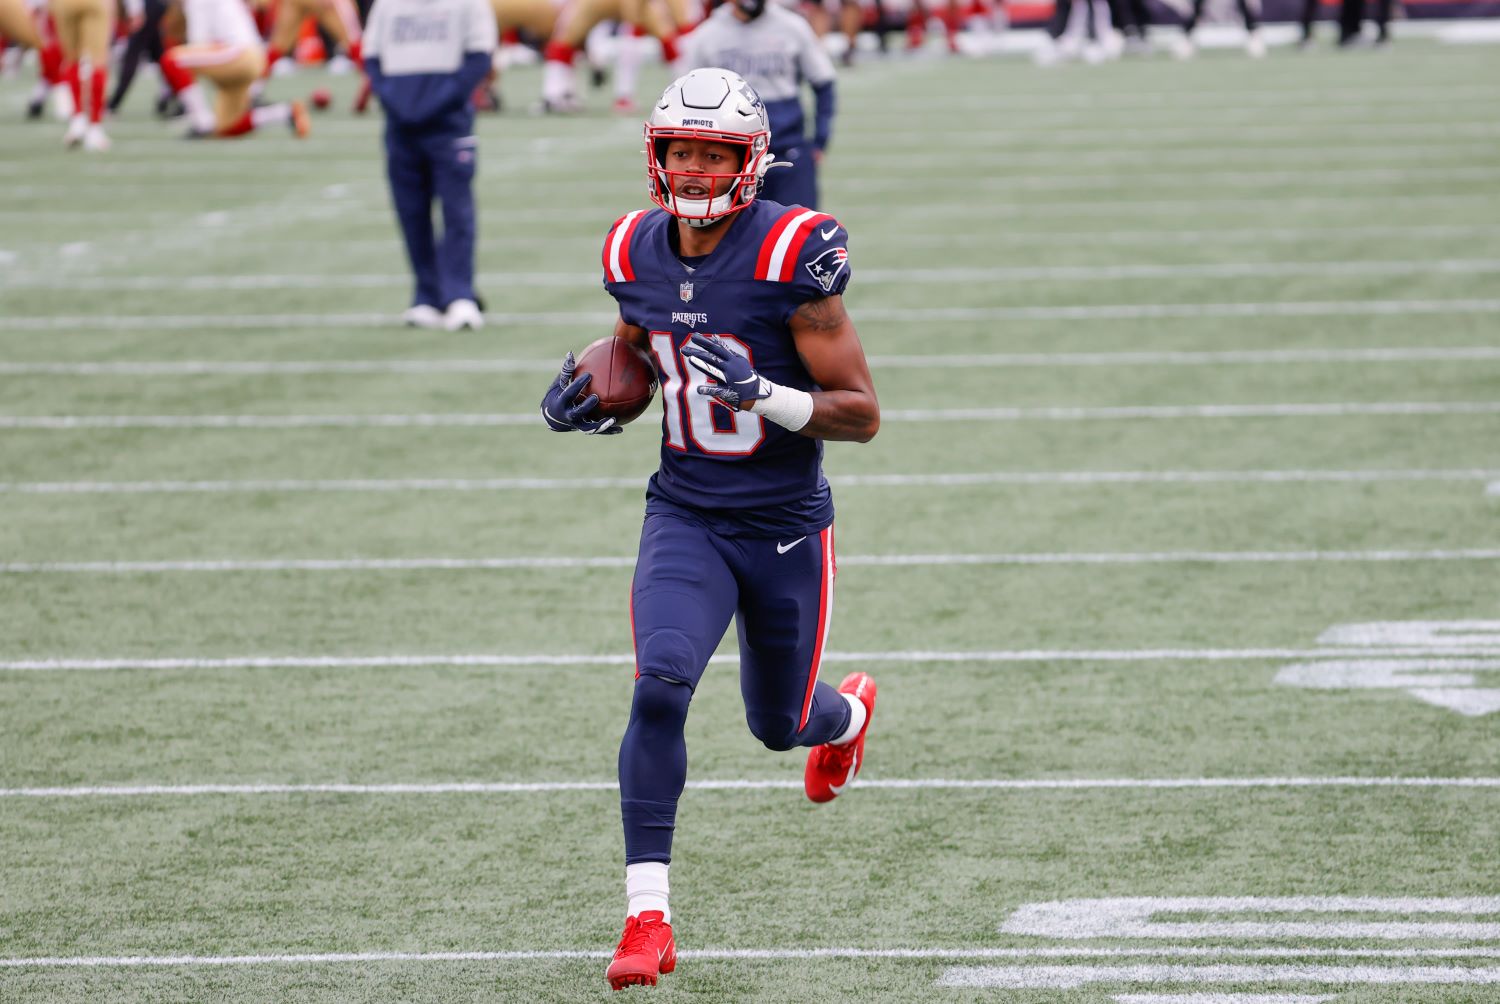 The Patriots need to play Jakobi Meyers over N'Keal Harry for the rest of the season given his ability to consistently get open for Cam Newton.